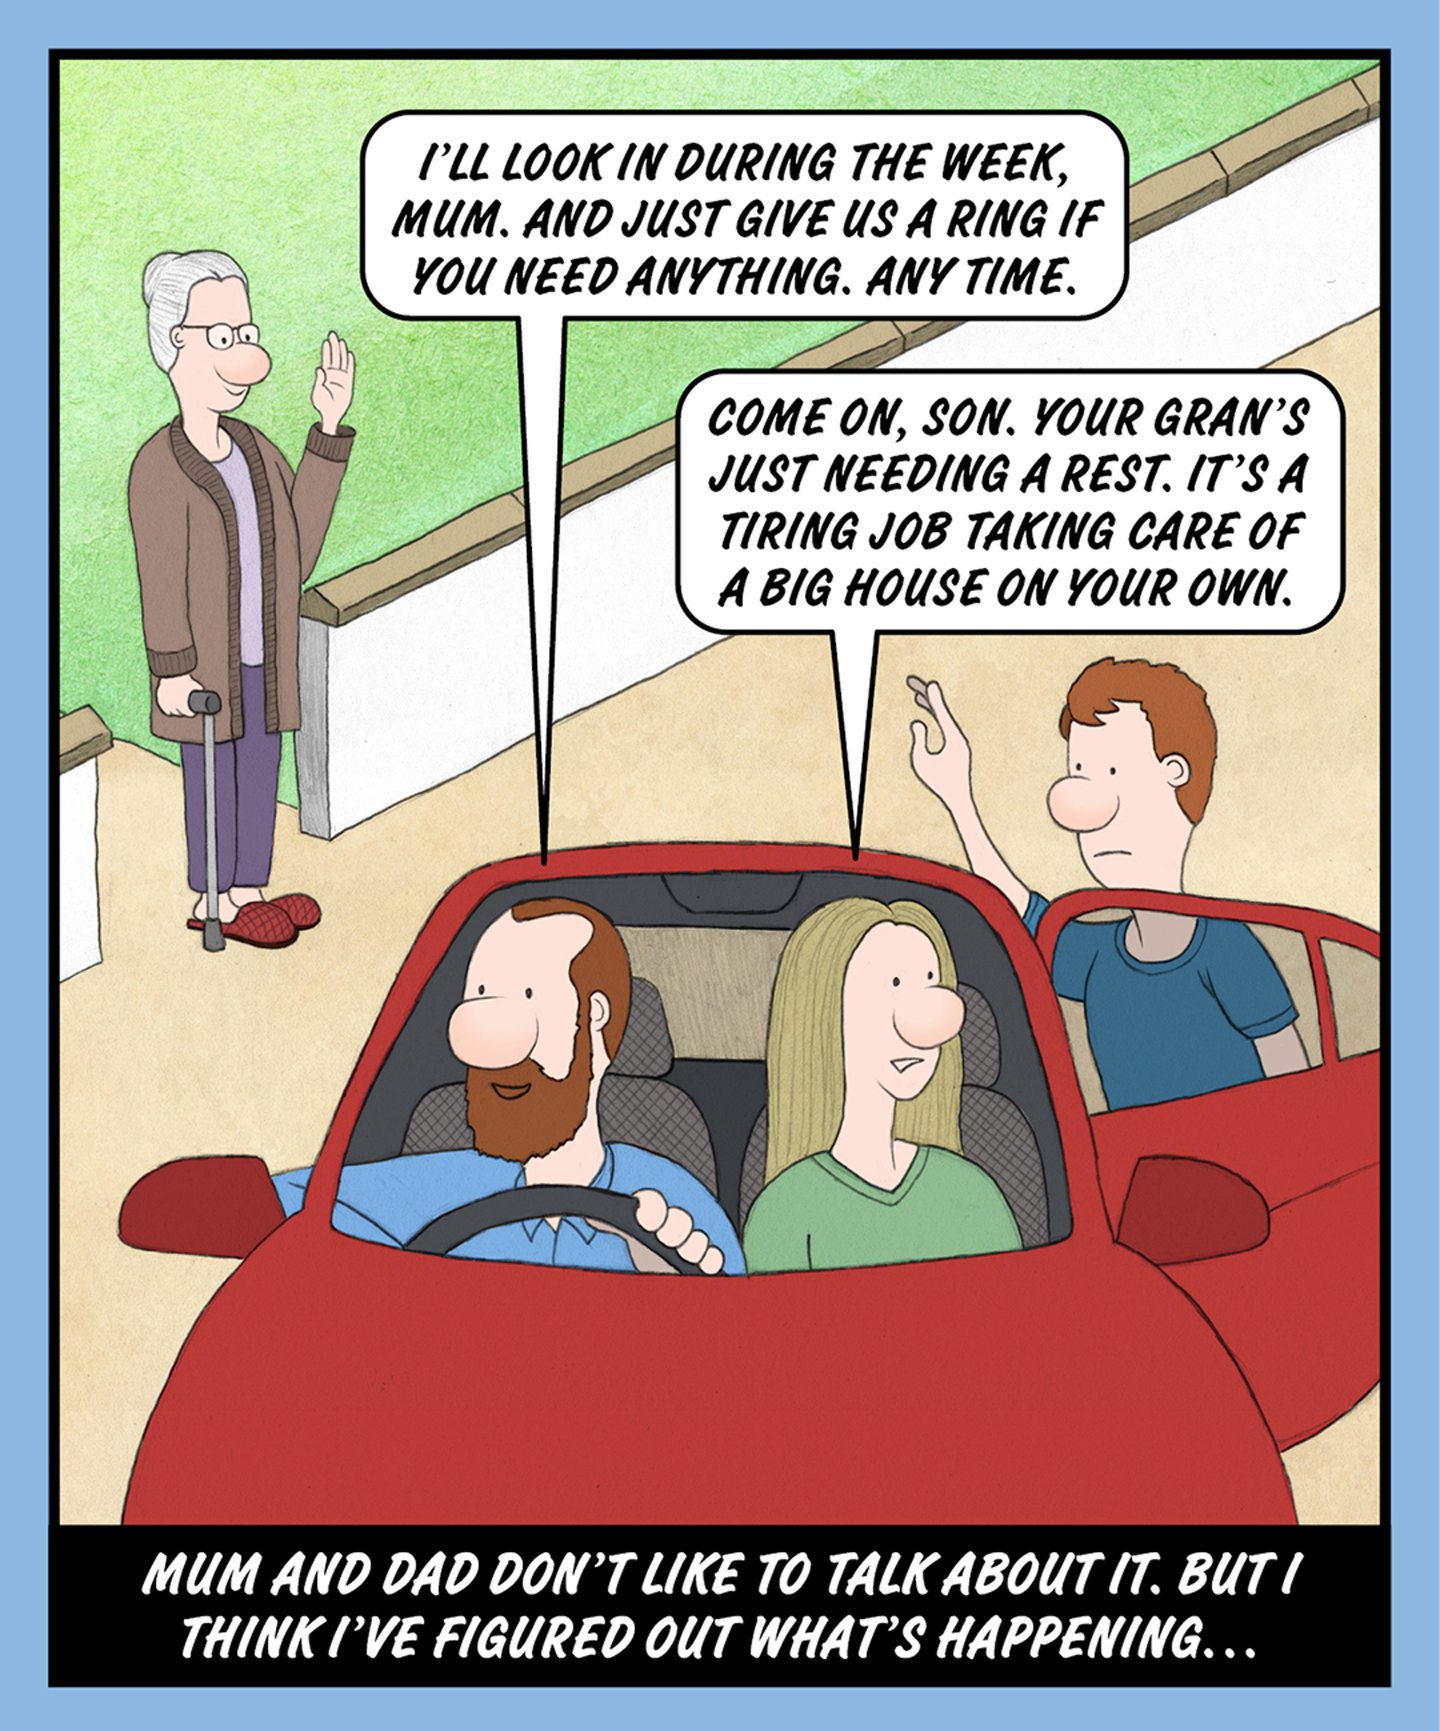 A comic illustration of three people leaving in a car and a granny standing by the road waving bye. The speech bubble from the car driver reads: I'LL LOOK IN DURING THE WEEK, MUM. AND JUST GIVE US A RING IF YOU NEED ANYTHING. ANY TIME. The speech bubble from the passenger reads: COME ON, SON. YOUR GRAN'S JUST NEEDING A REST. IT'S A TIRING JOB TAKING CARE OF A BIG HOUSE ON YOUR OWN. The text below the image reads: MUM AND DAD DON'T LIKE TO TALK ABOUT IT. BUT I THINK I'VE FIGURED OUT WHAT'S HAPPENING…